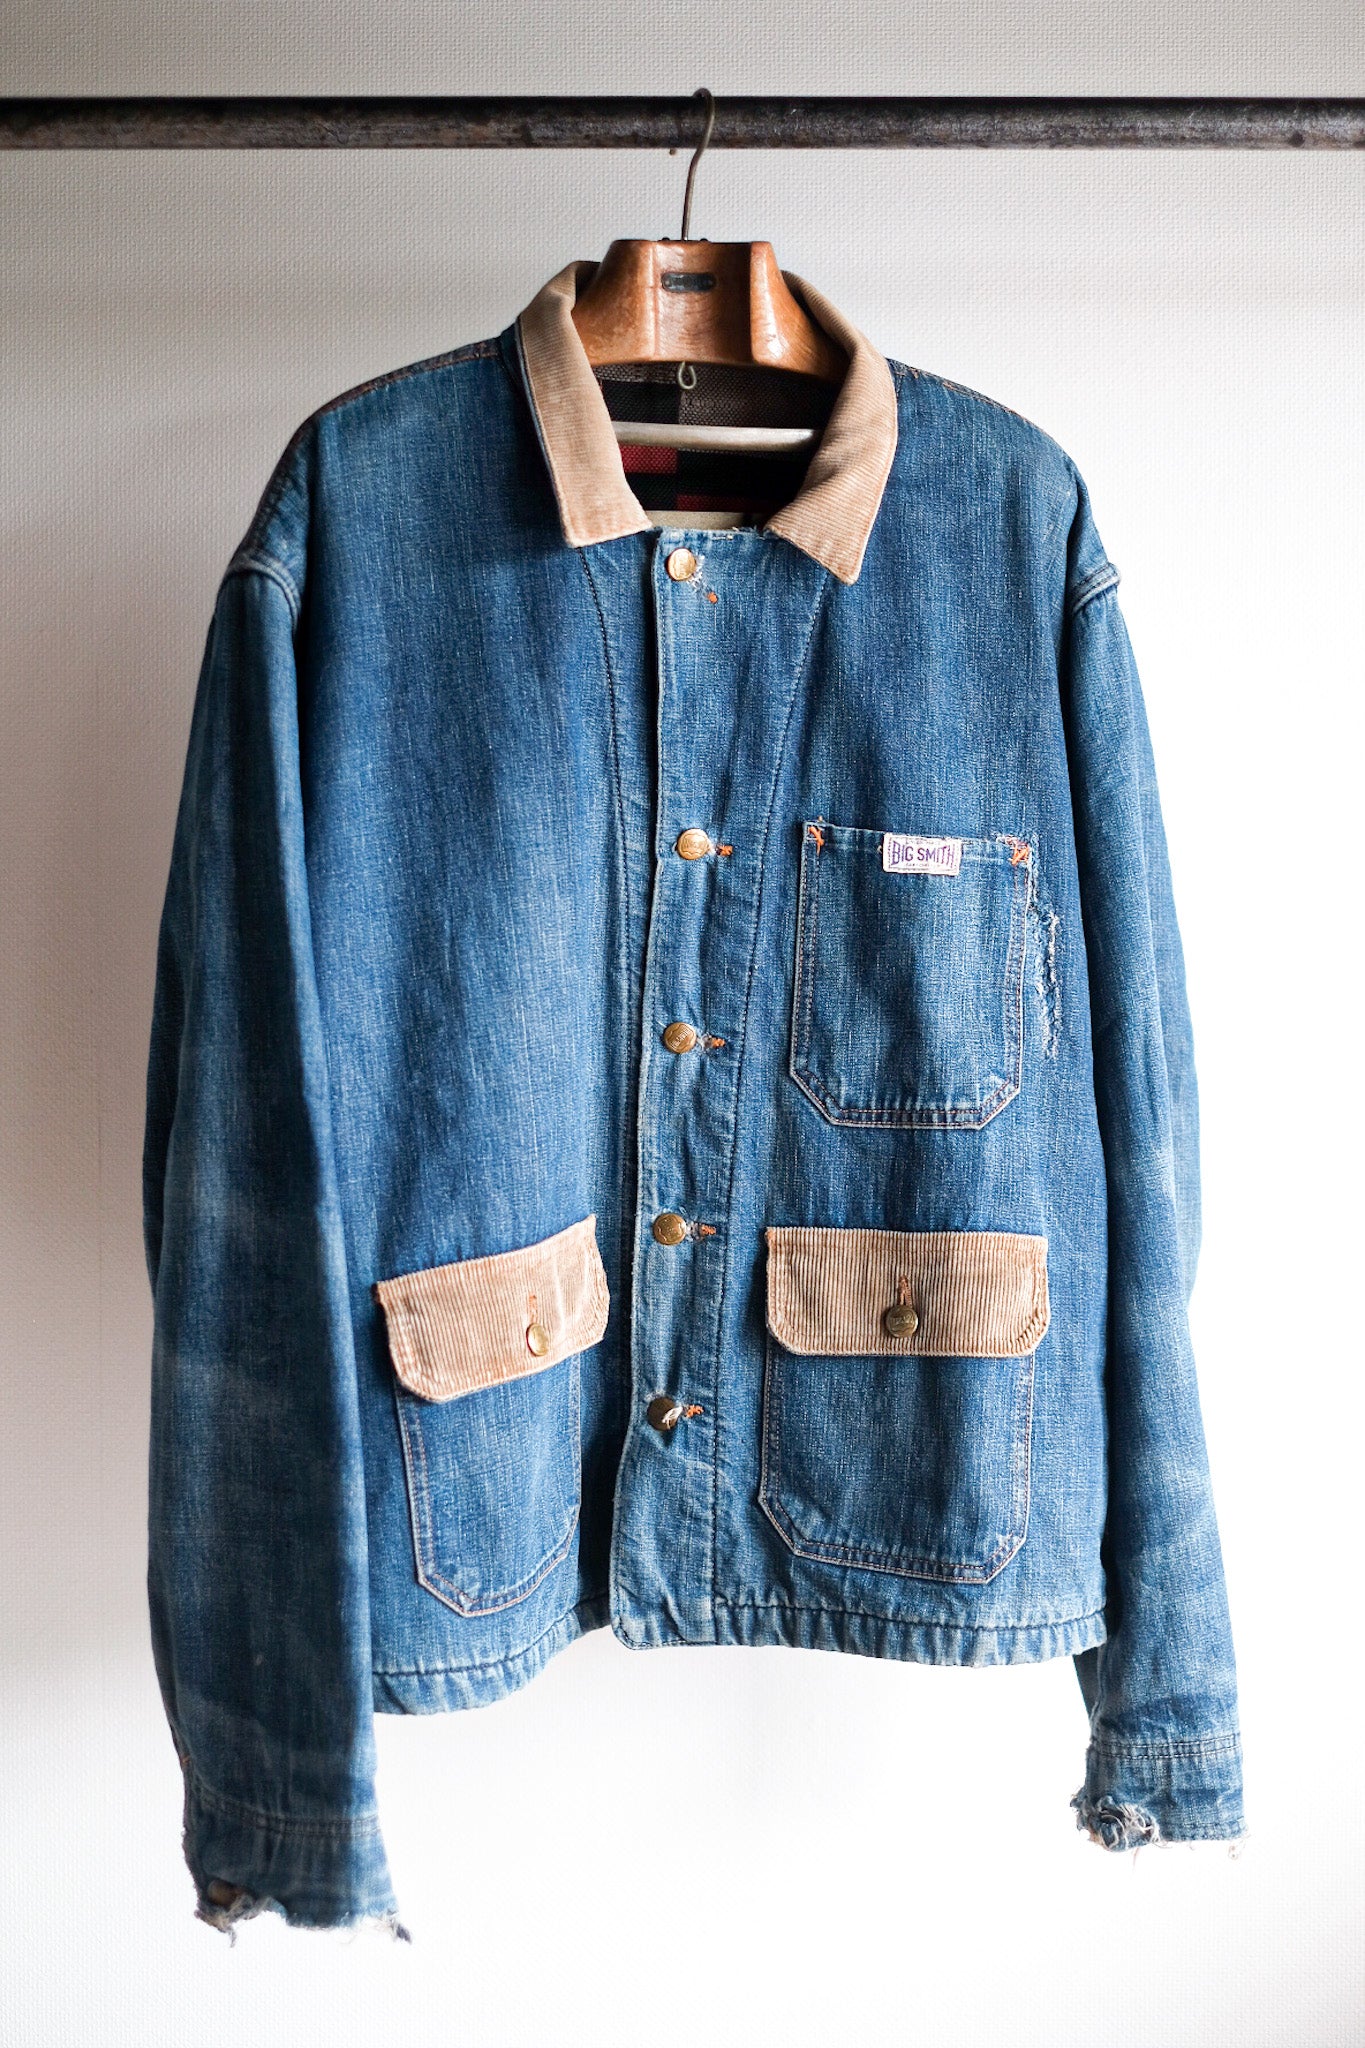 [~ 40's] American Vintage Denim Coverall with Blanket "Big Smith"